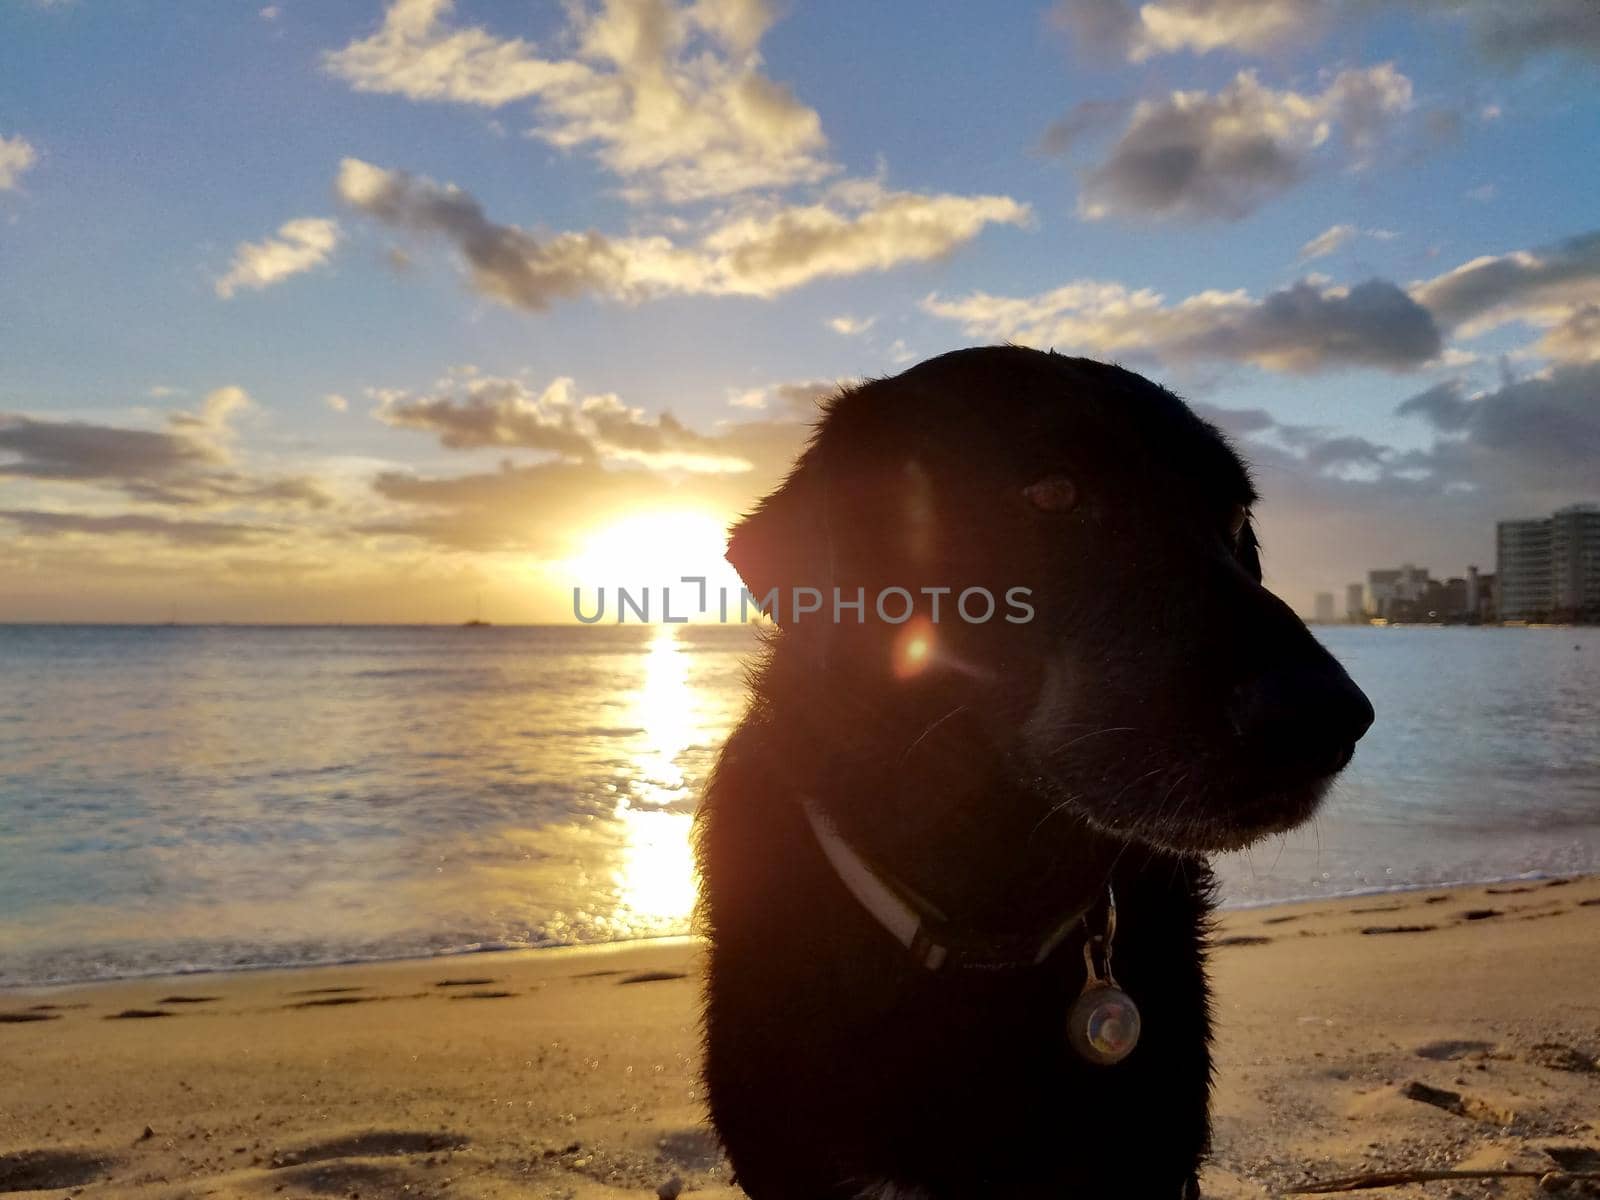 Black retriever Dog with collar at at Kaimana Beach at sunset view of Pacific ocean on Oahu, Hawaii.